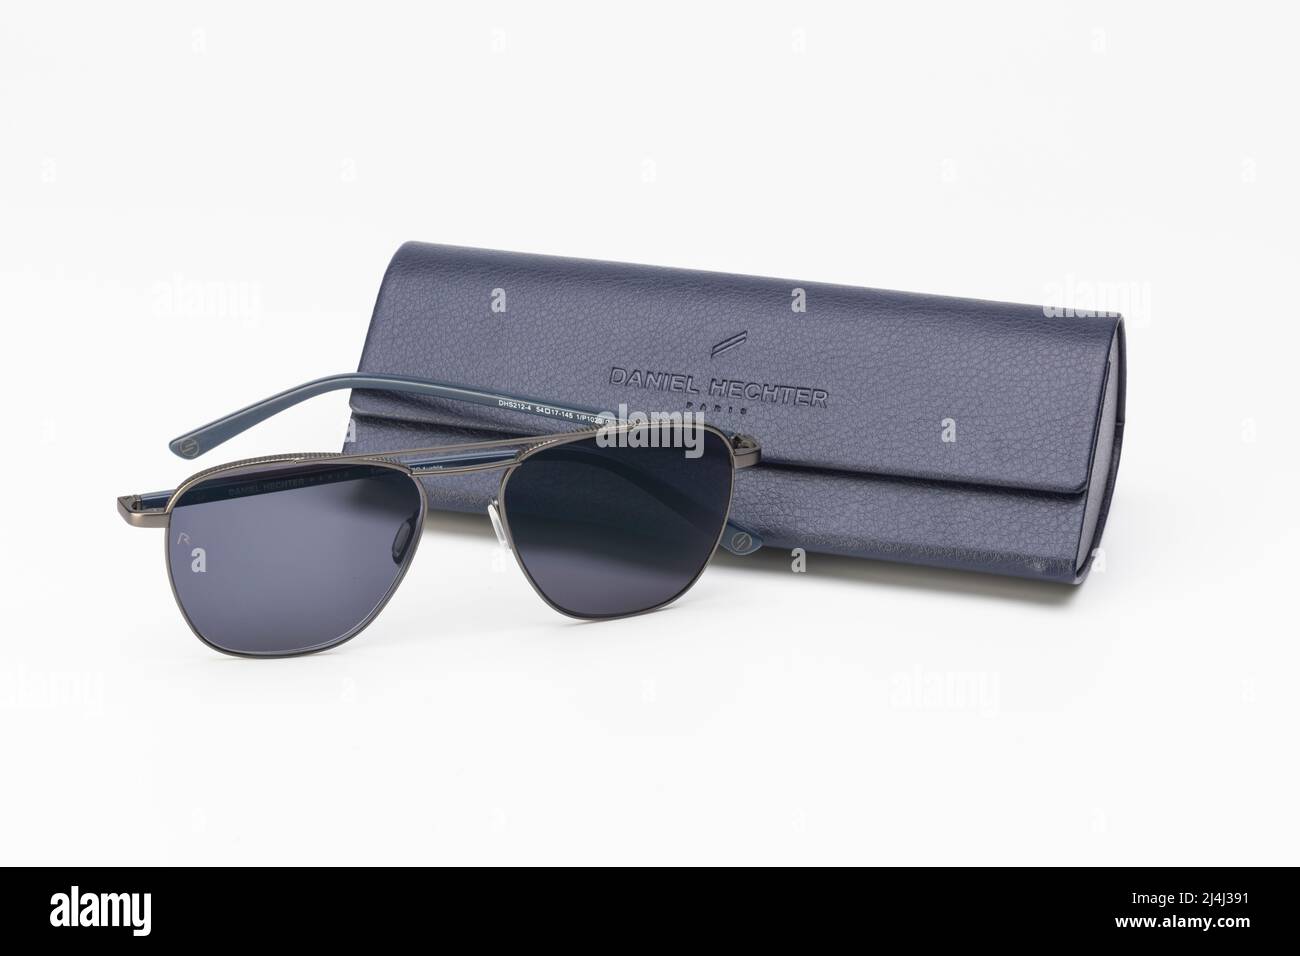 A pair of sunglasses with a blue Daniel Hechter case Stock Photo - Alamy